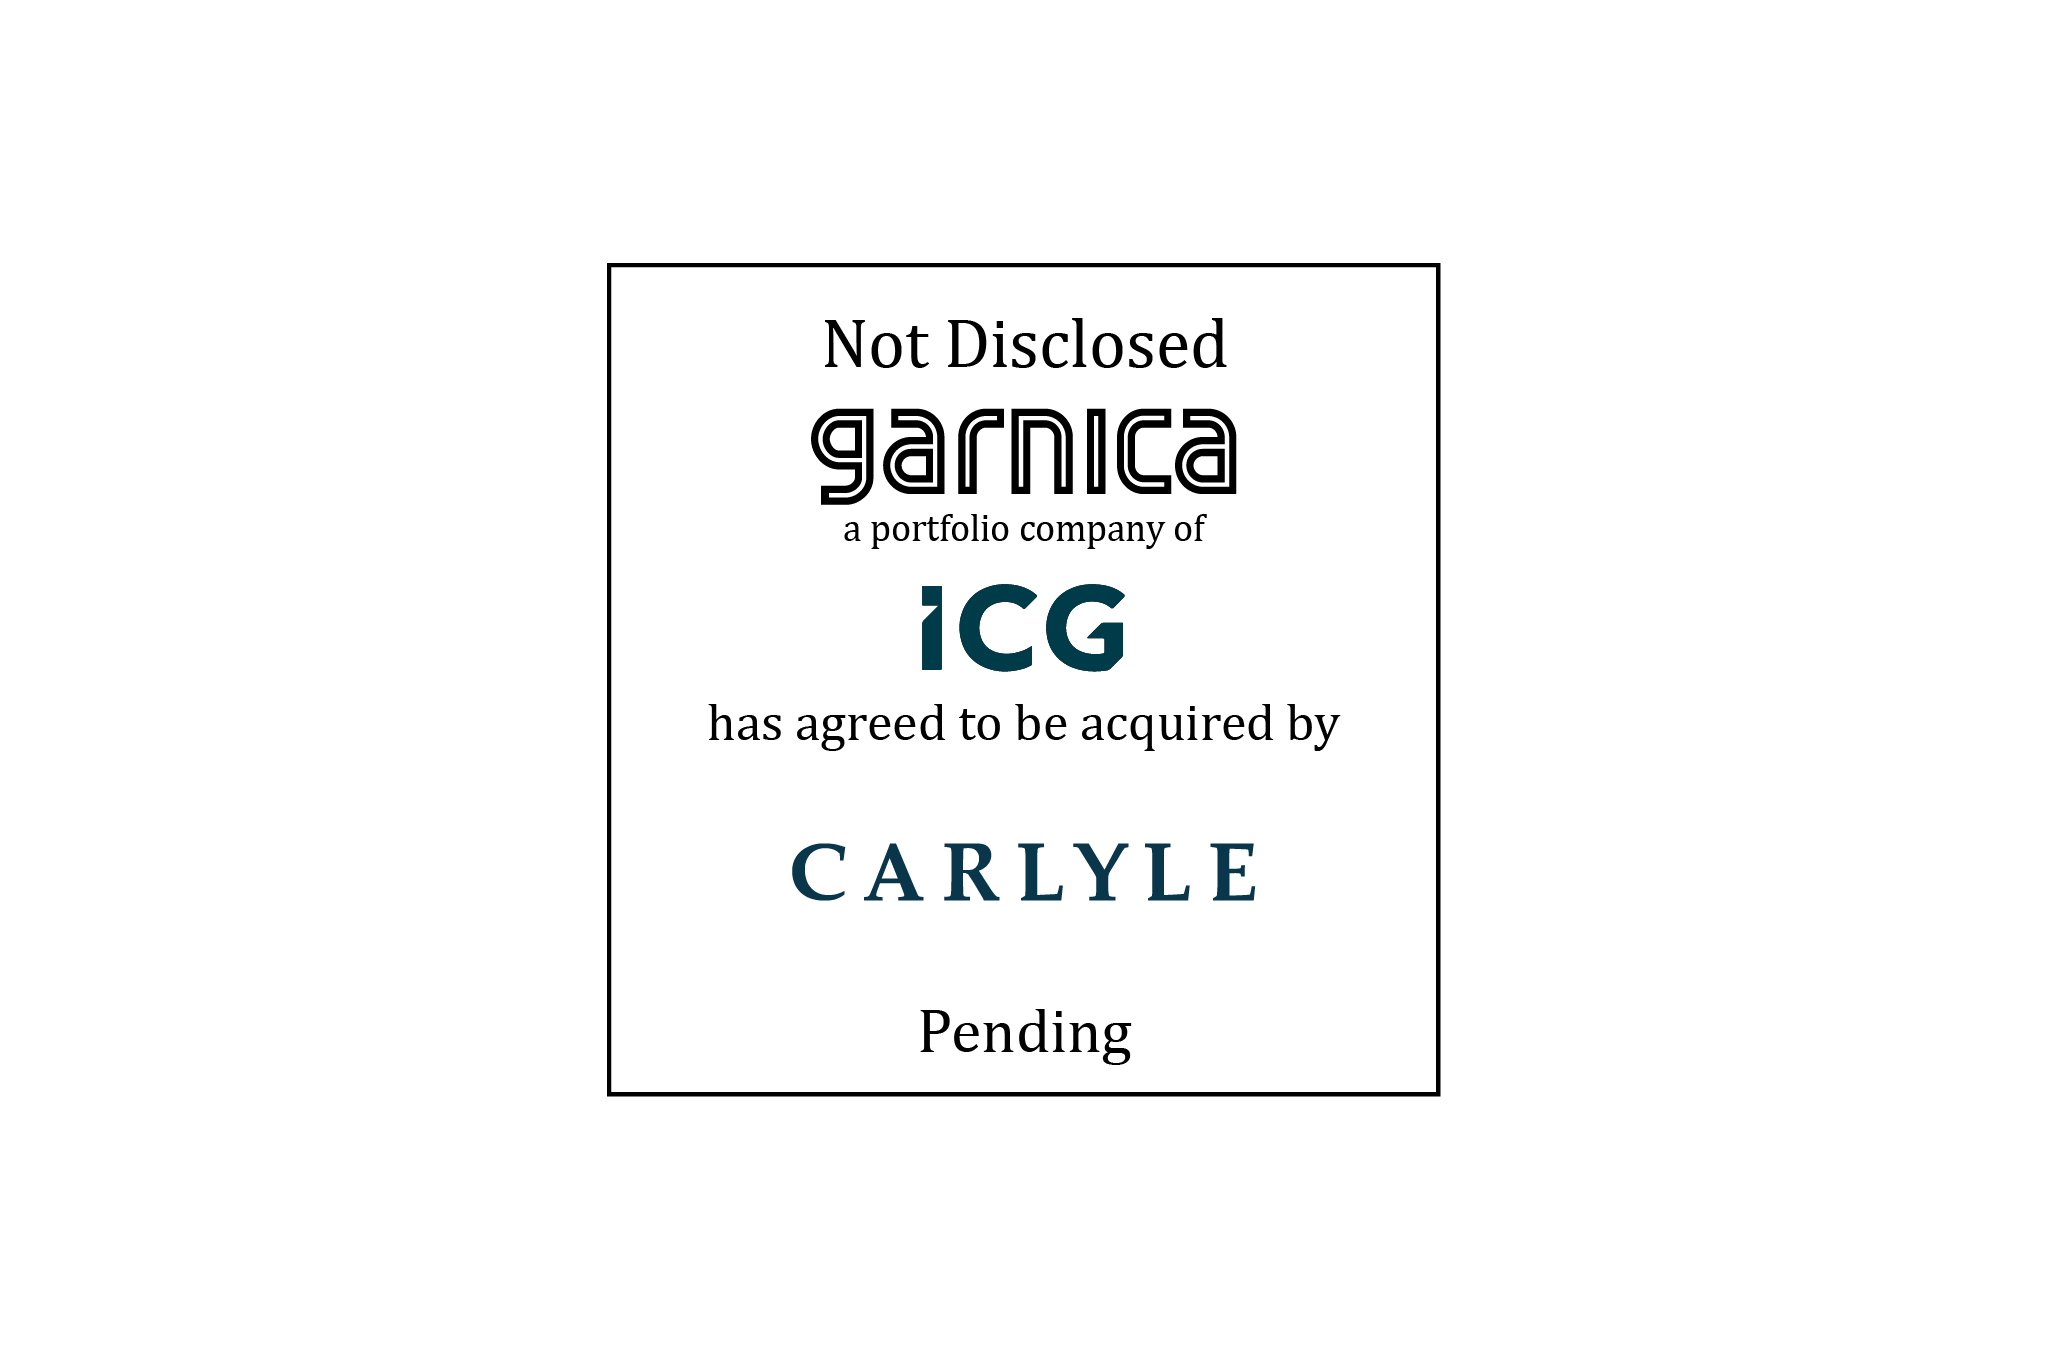 Not Disclosed | Garnica (logo), a portfolio company of ICG, Has Agreed to be Acquired by Carlyle (logo) | Pending